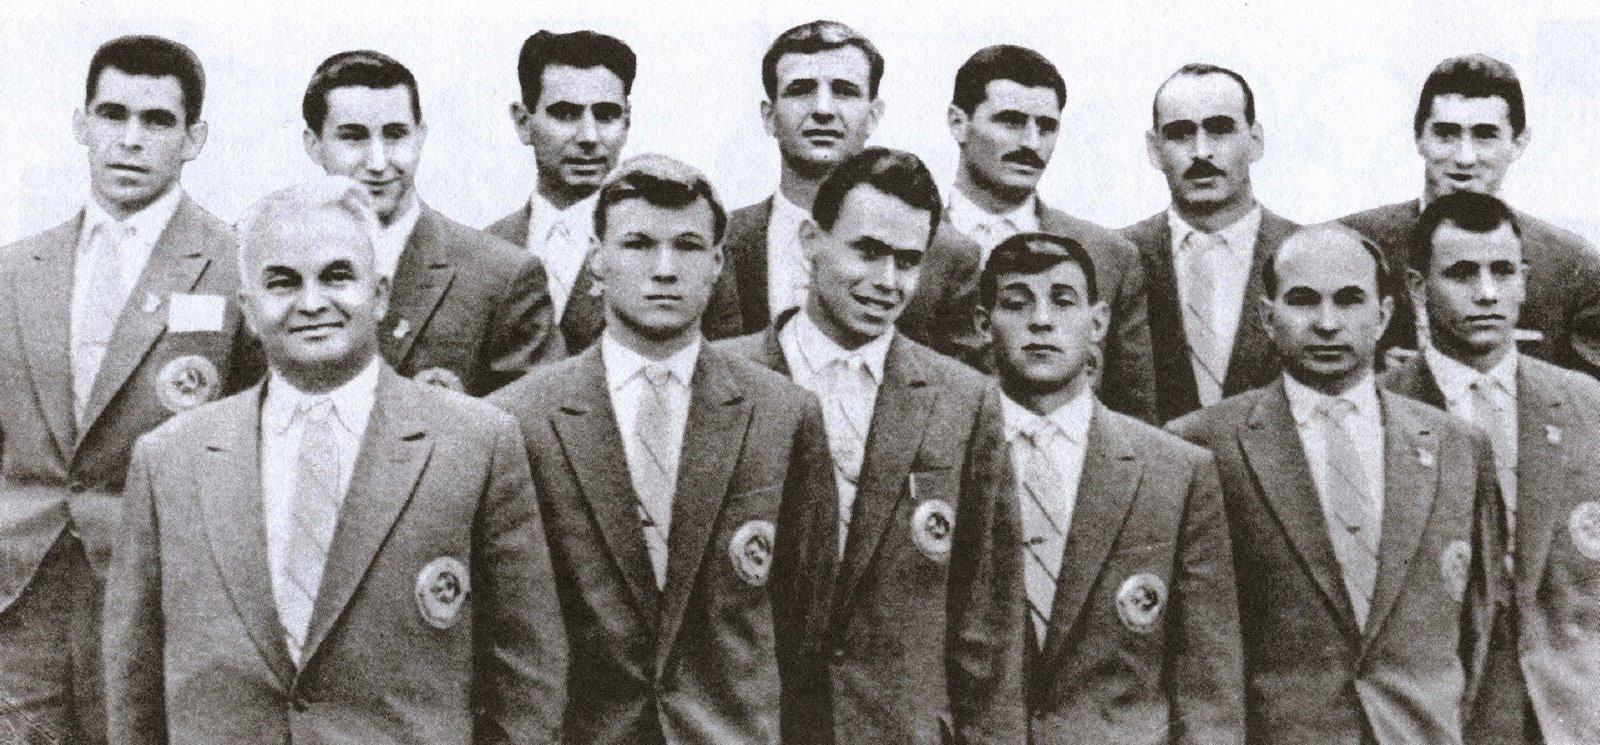 Victor Ageev, third left in the front row, was a member of the Soviet Union water polo team that won the Olympic silver medal at Rome 1960 ©Russian Water Polo Federation